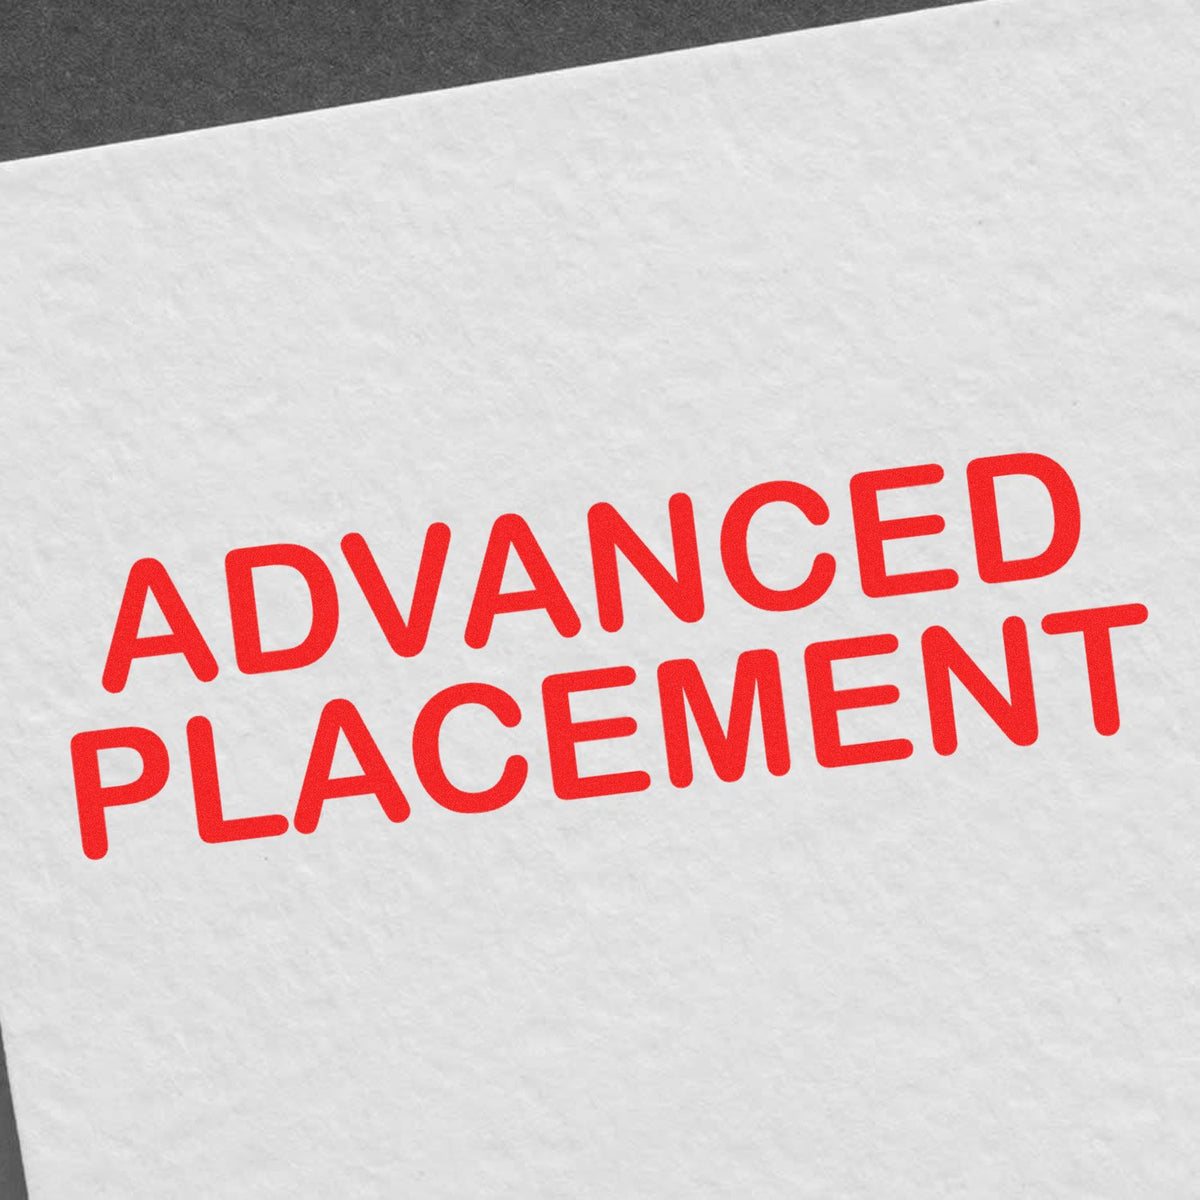 Large Self-Inking Advanced Placement Stamp In Use Photo